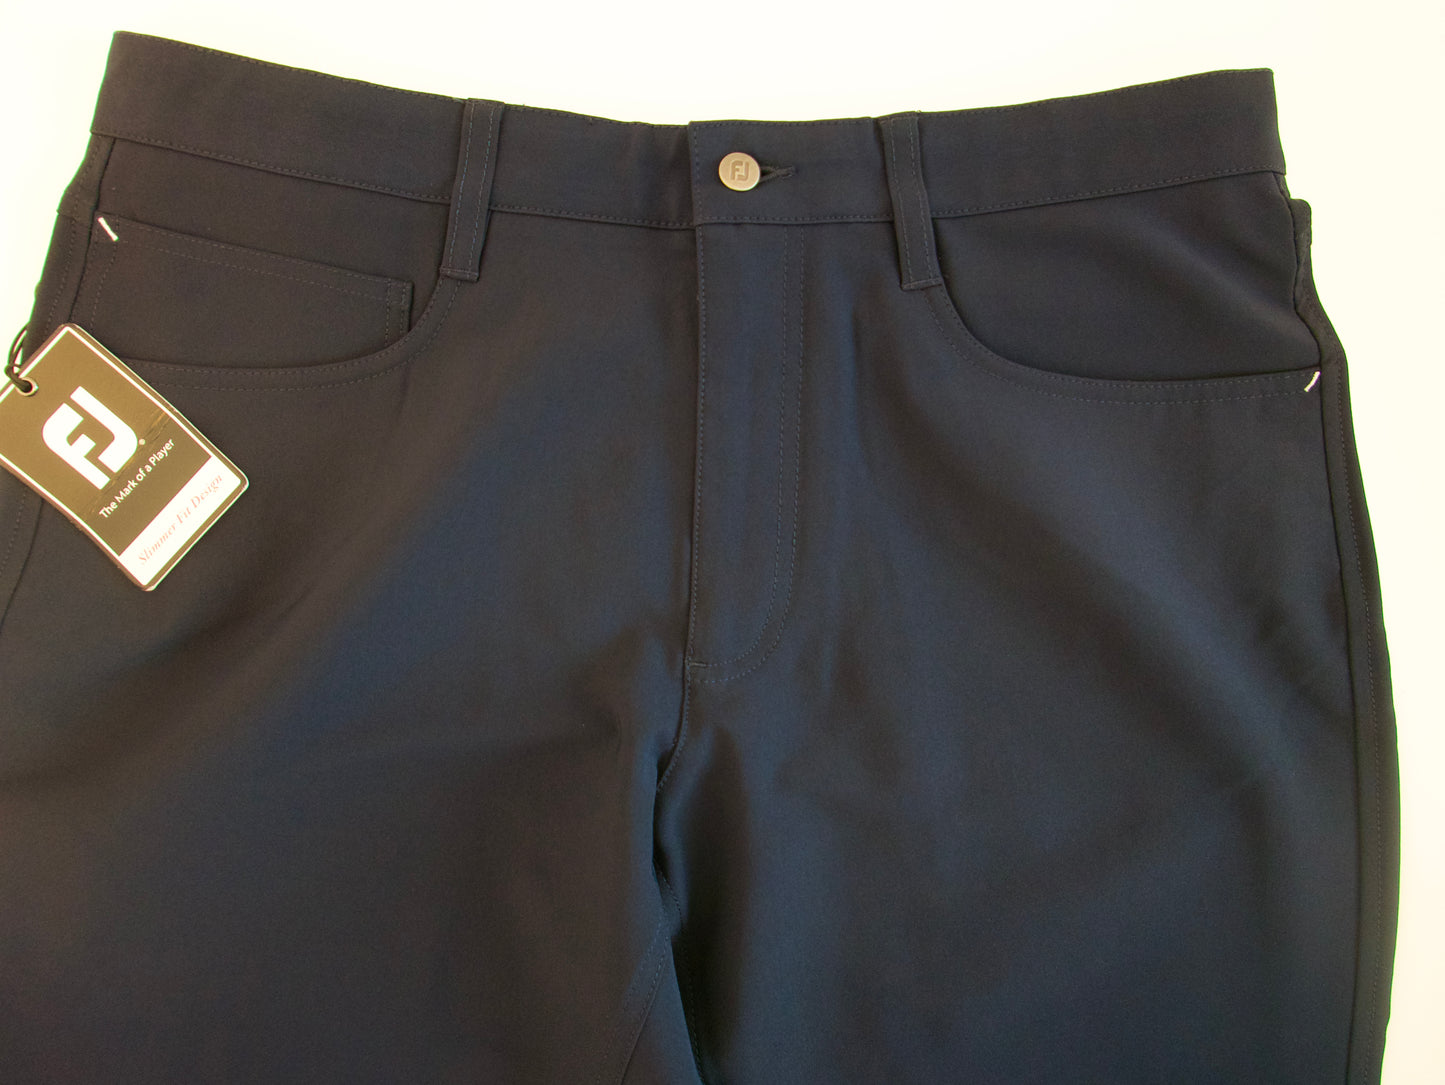 Footjoy Pants in Black and Blue, Size 34